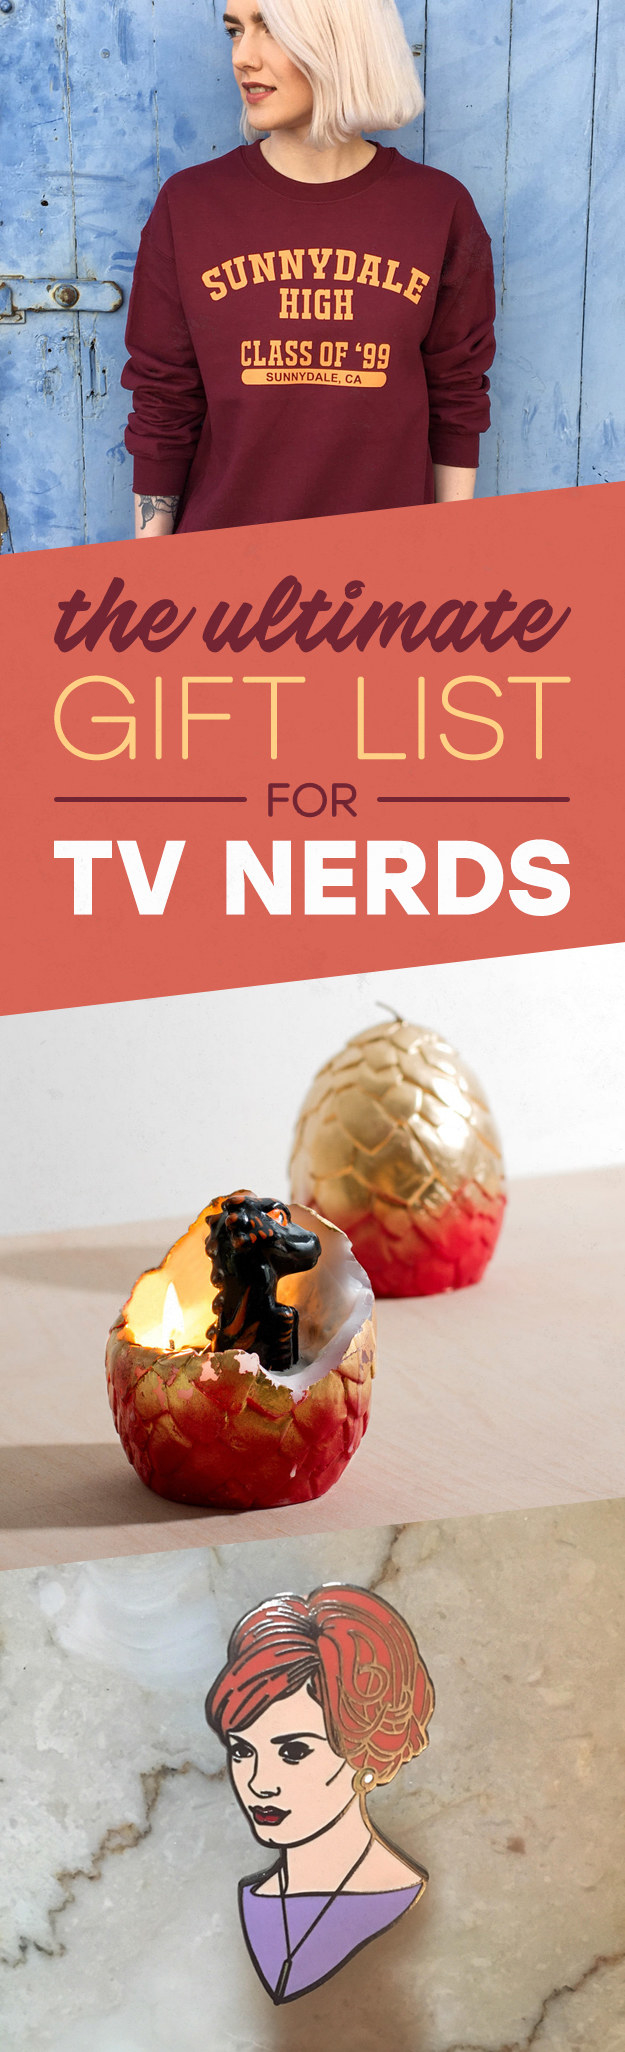 The Ultimate Gift List For TV Nerds